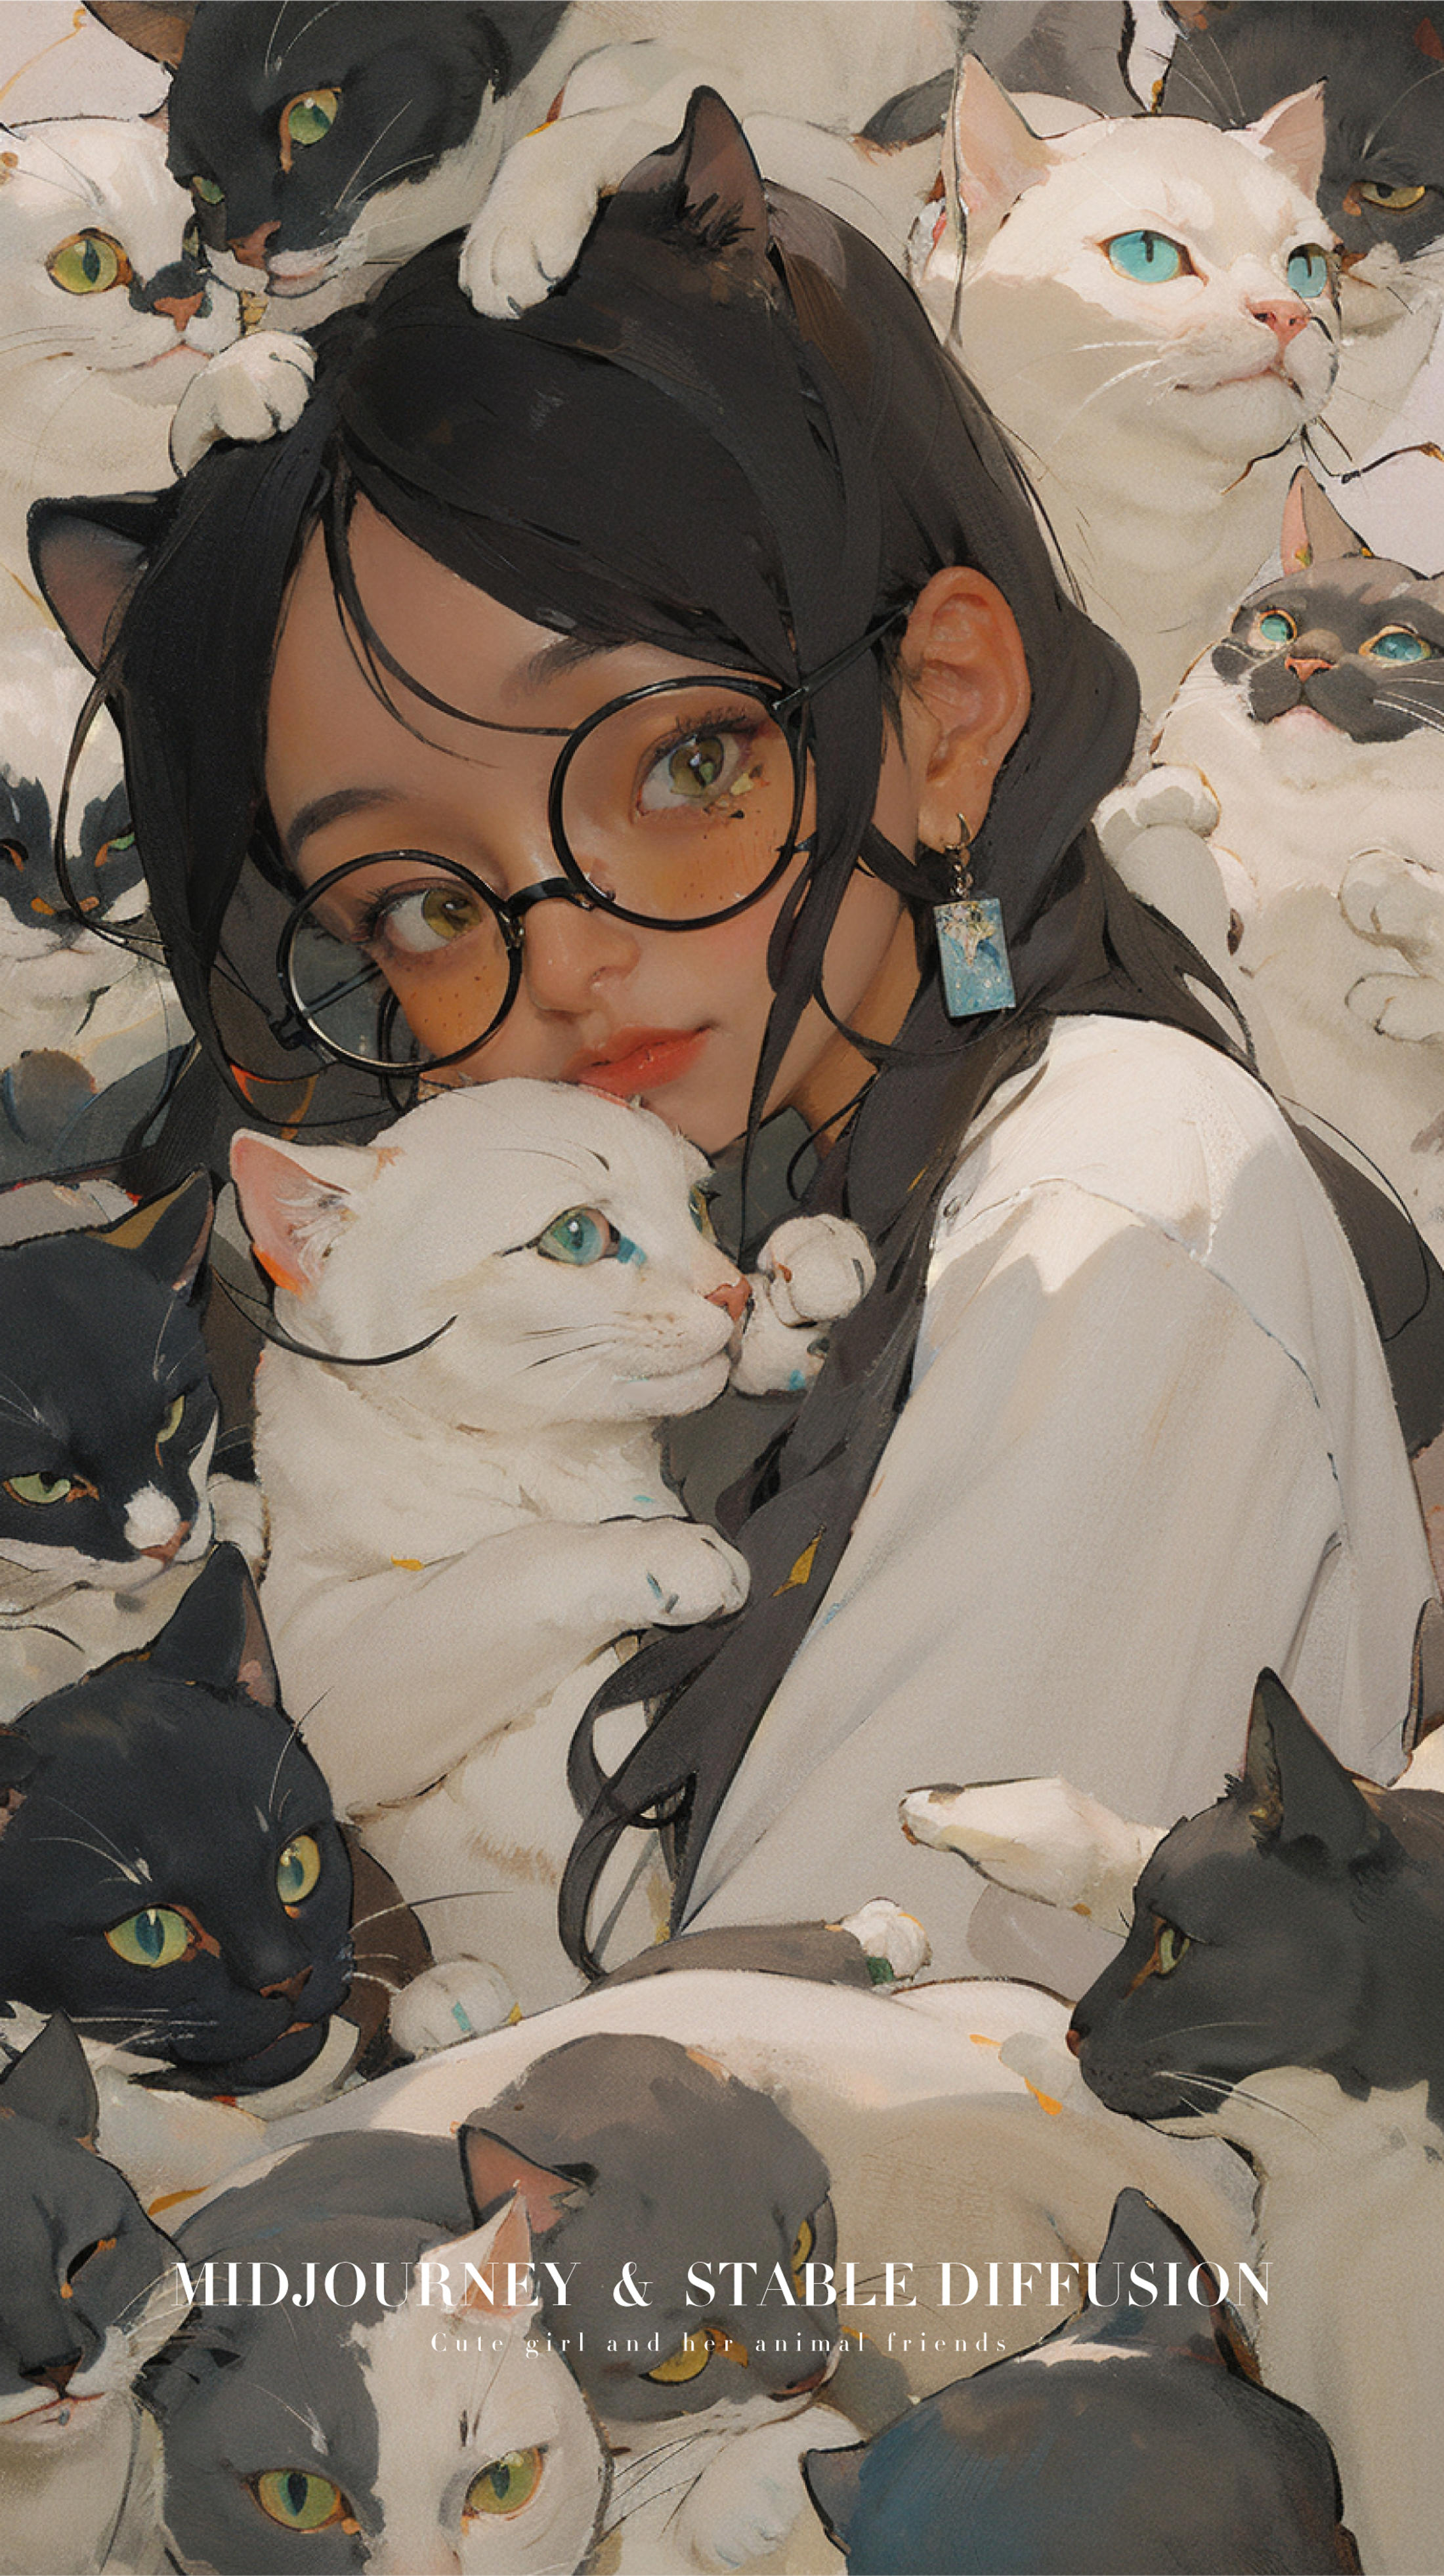 A girl holding a white cat and surrounded by black cats.